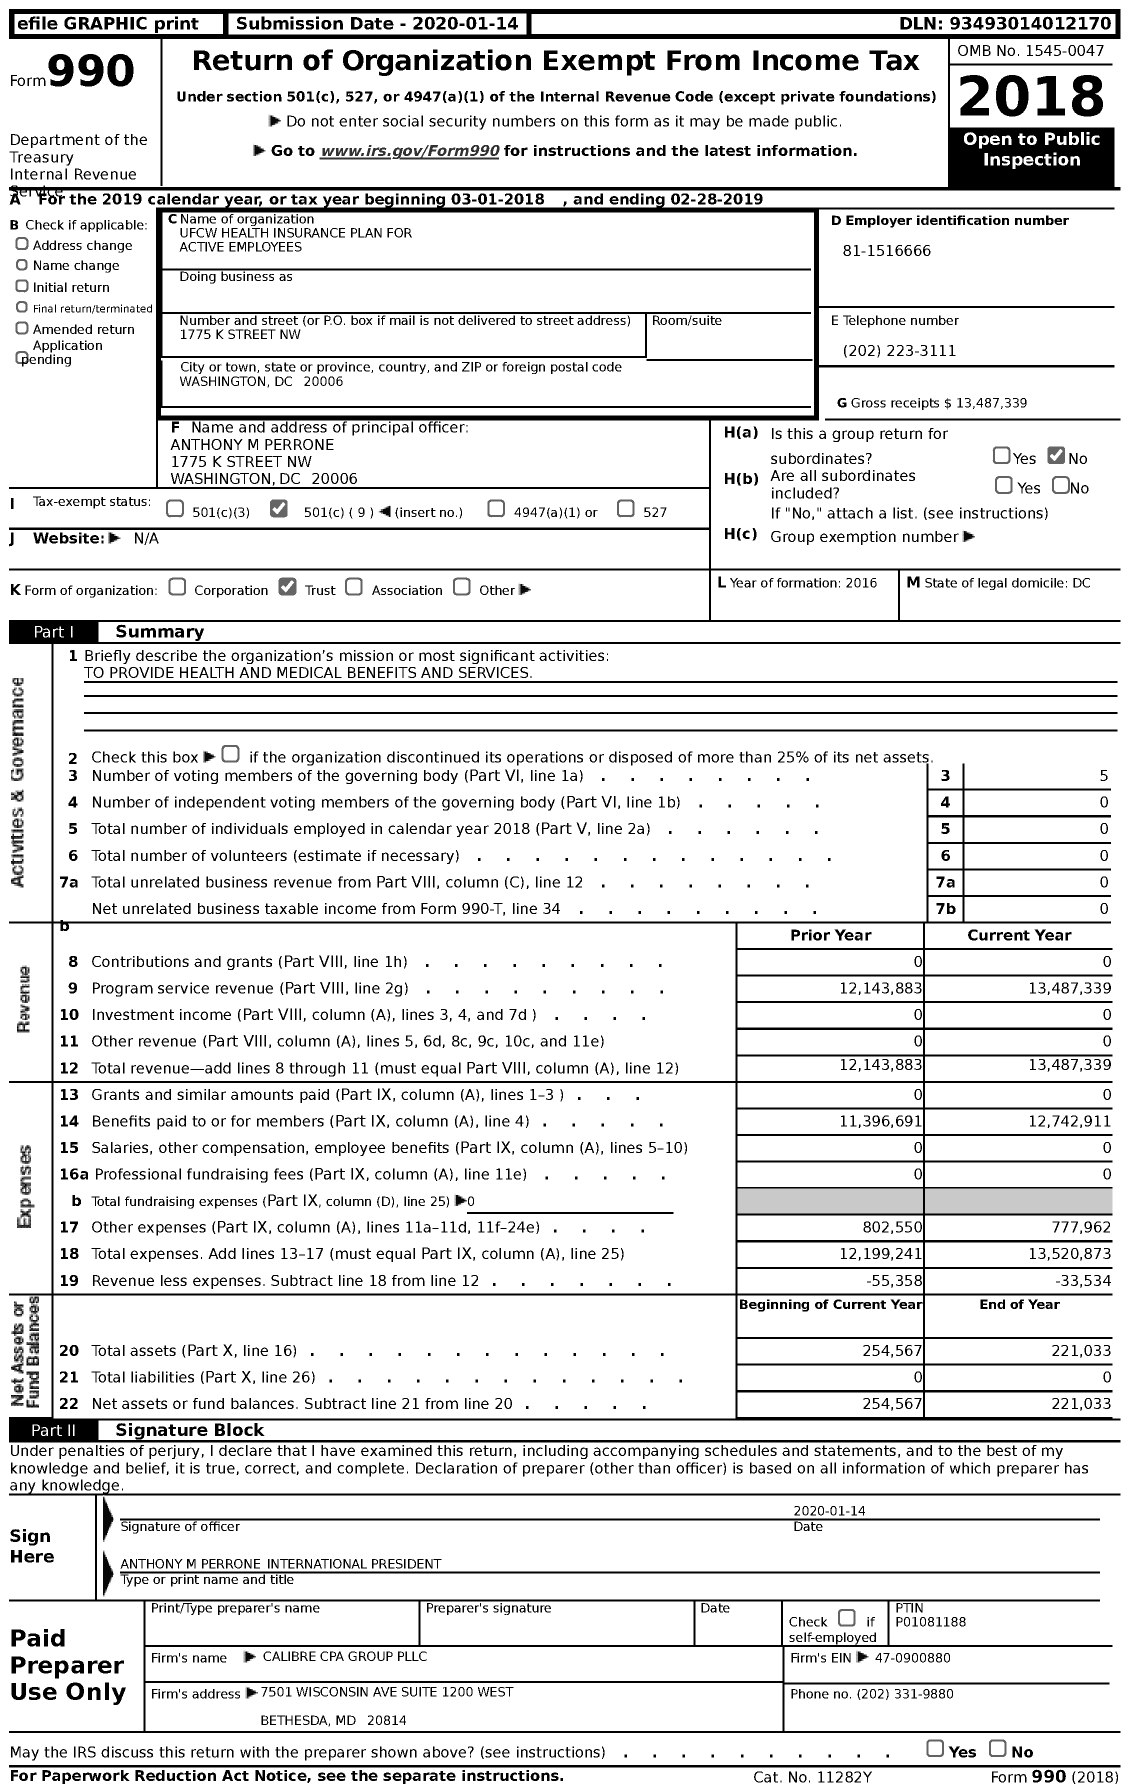 Image of first page of 2018 Form 990 for Ufcw Health Insurance Plan for Active Employees